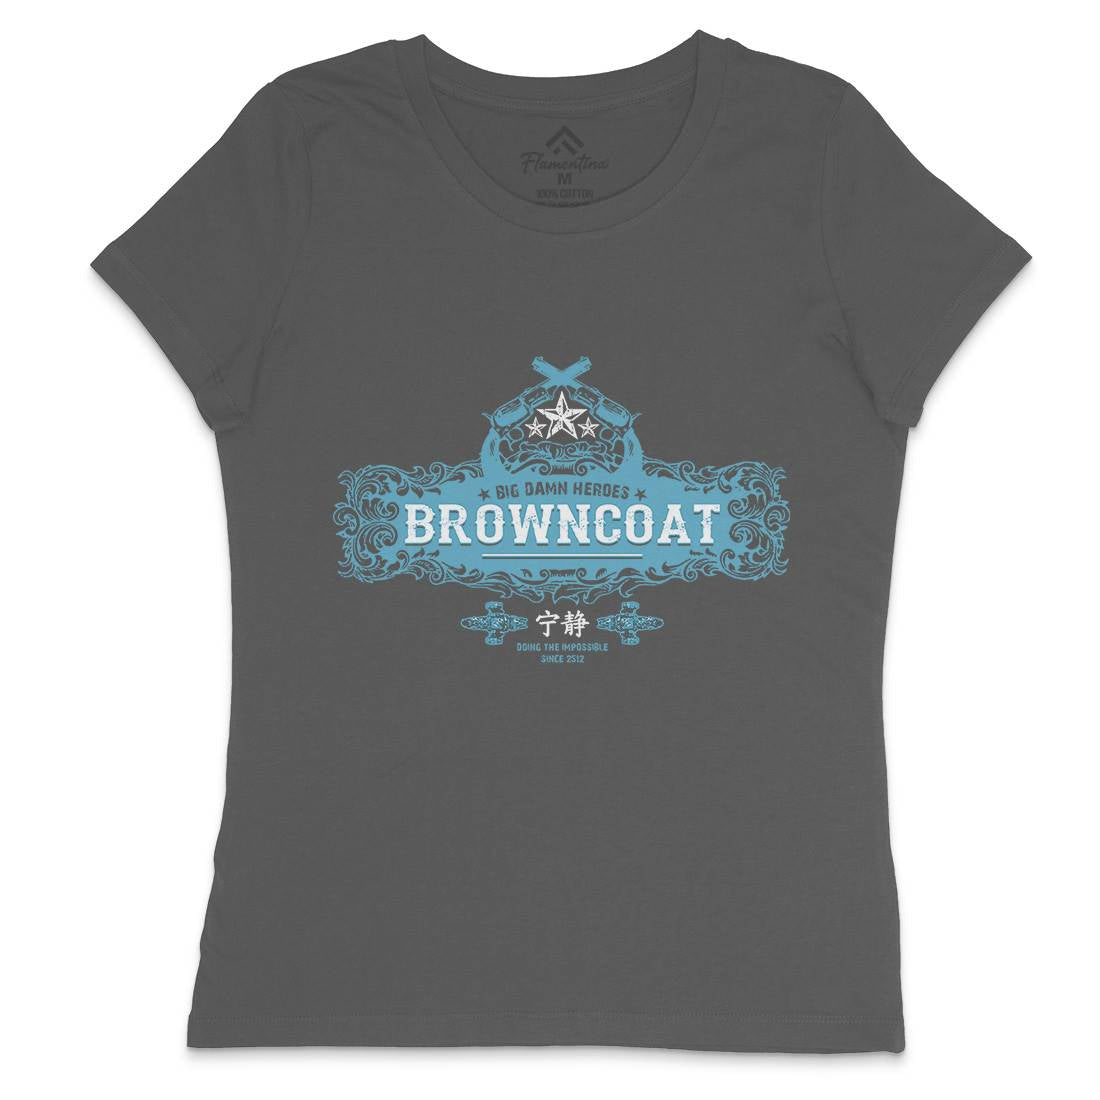 Browncoat Womens Crew Neck T-Shirt Space D350